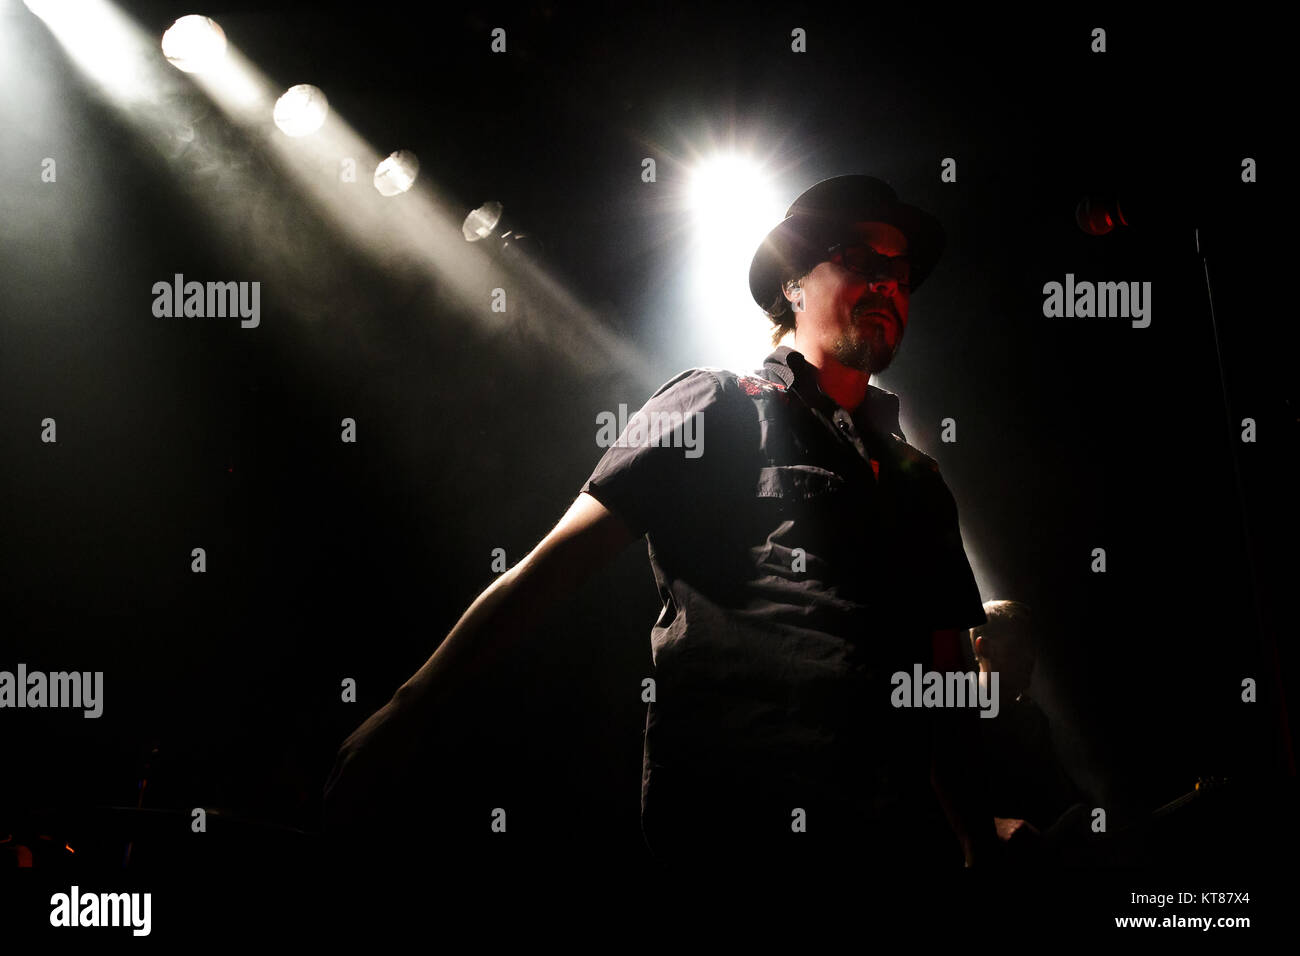 The Swedish rock band Dead Soul performs a live concert at Kulturbolaget in Malmö. Here vocalist Anders Landelius is seen live on stage. Sweden, 04/10 2014. Stock Photo